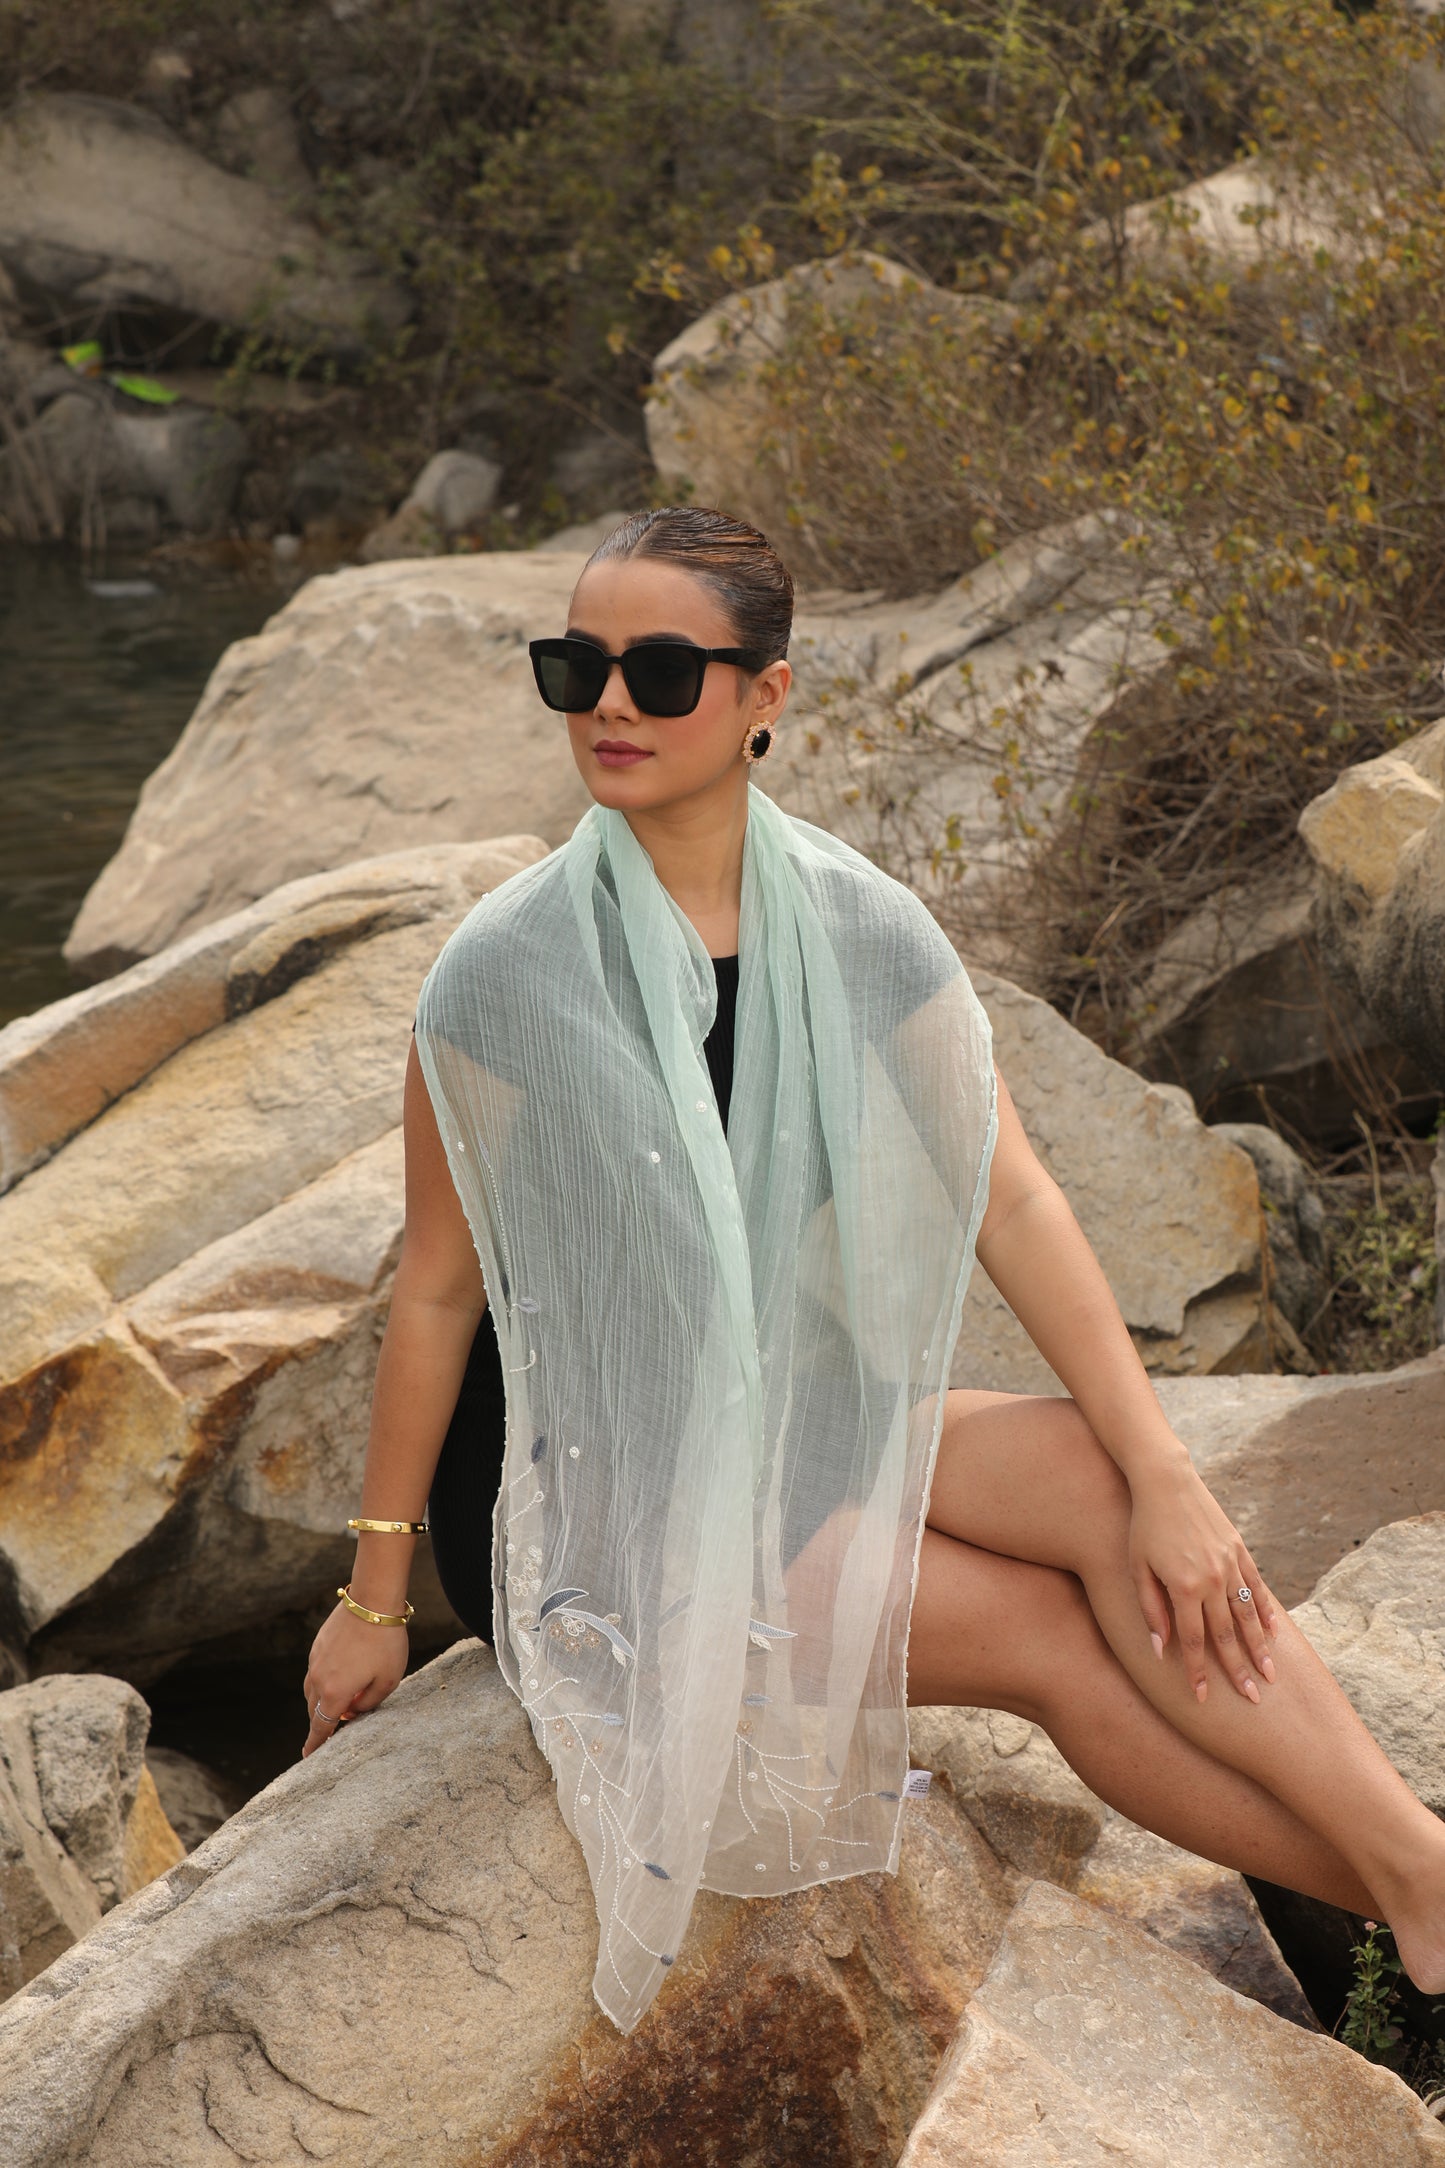 Modarta presents a stunning white silk scarf, ideal for women seeking elegance and versatility. This lightweight cotton scarf doubles as a chic headscarf, offering sophistication and comfort for any occasion.